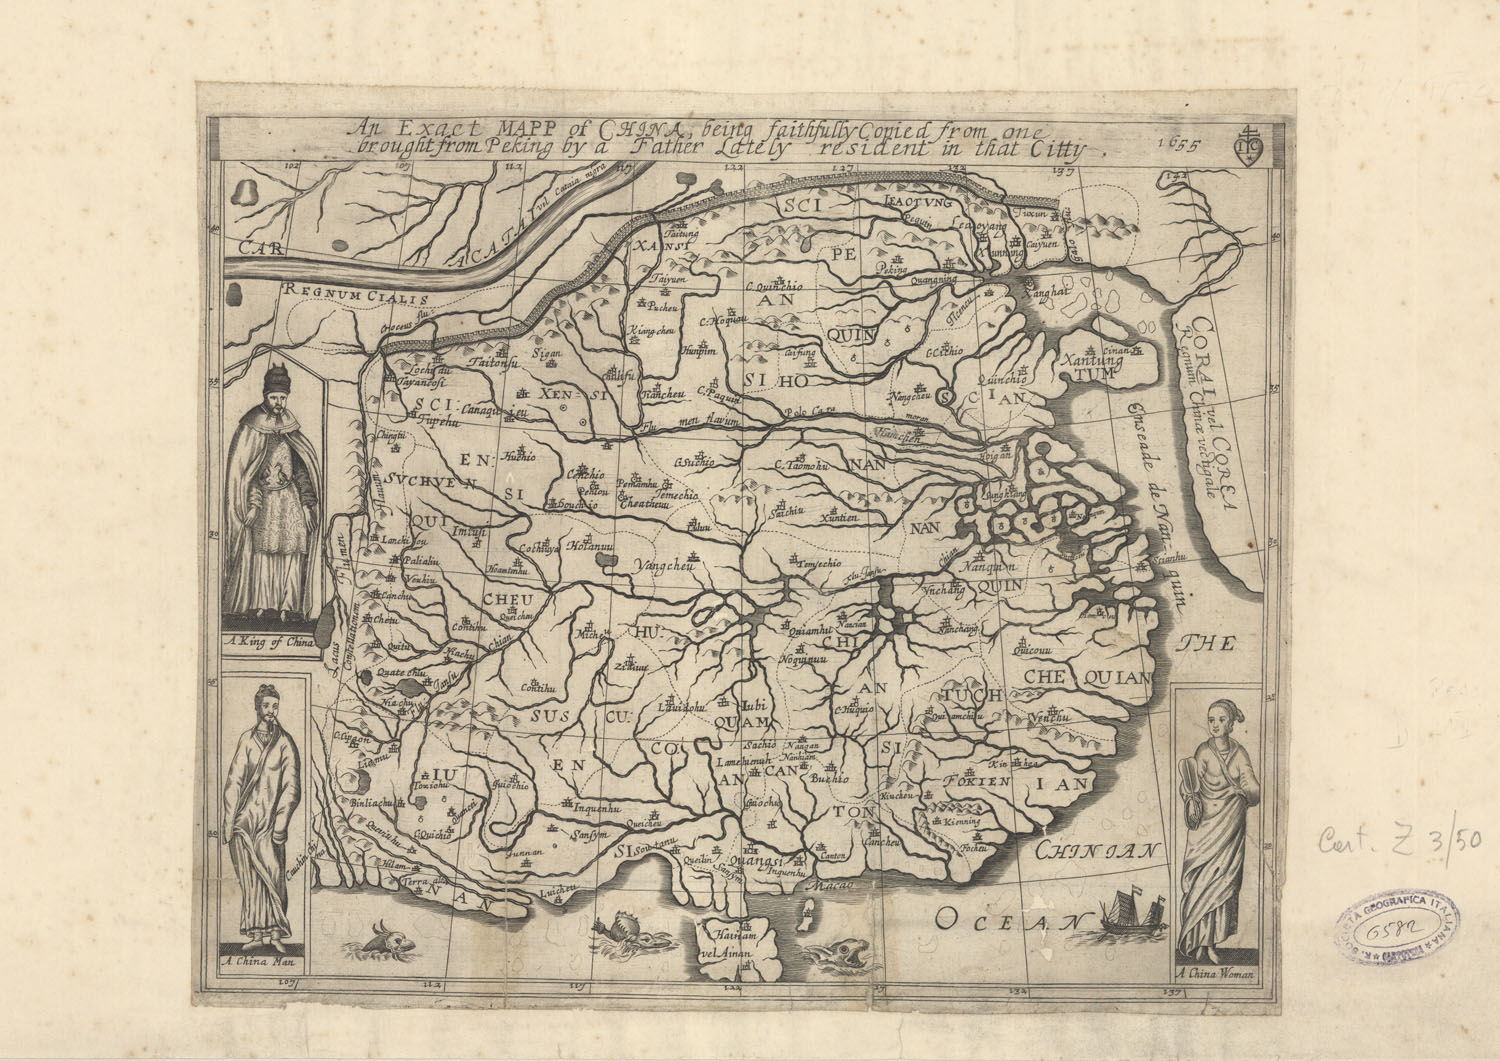 Venerdì Cartografico – An exact mapp of China, being faithfully copied from one brought from Peking by a father lately resident in that citty, 165